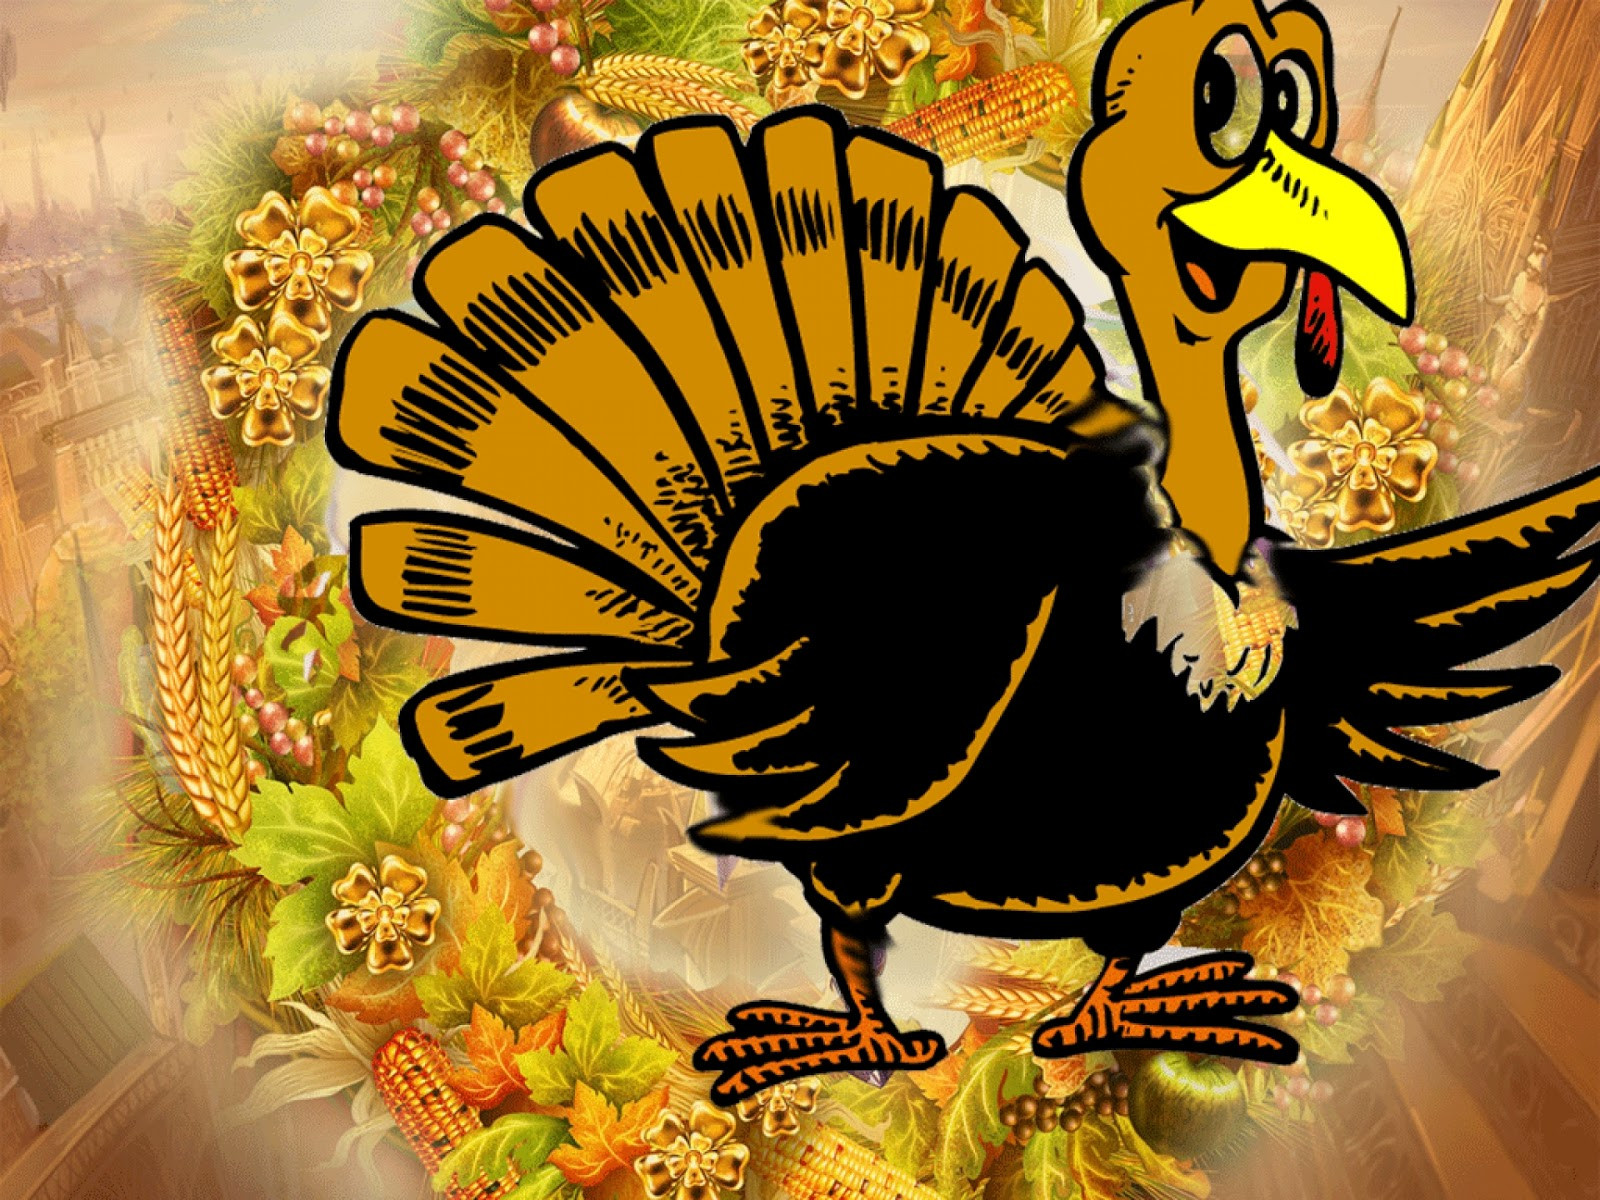 Thanksgiving Turkey Wallpaper
 Thanksgiving Day 2012 Free HD Thanksgiving Wallpapers for